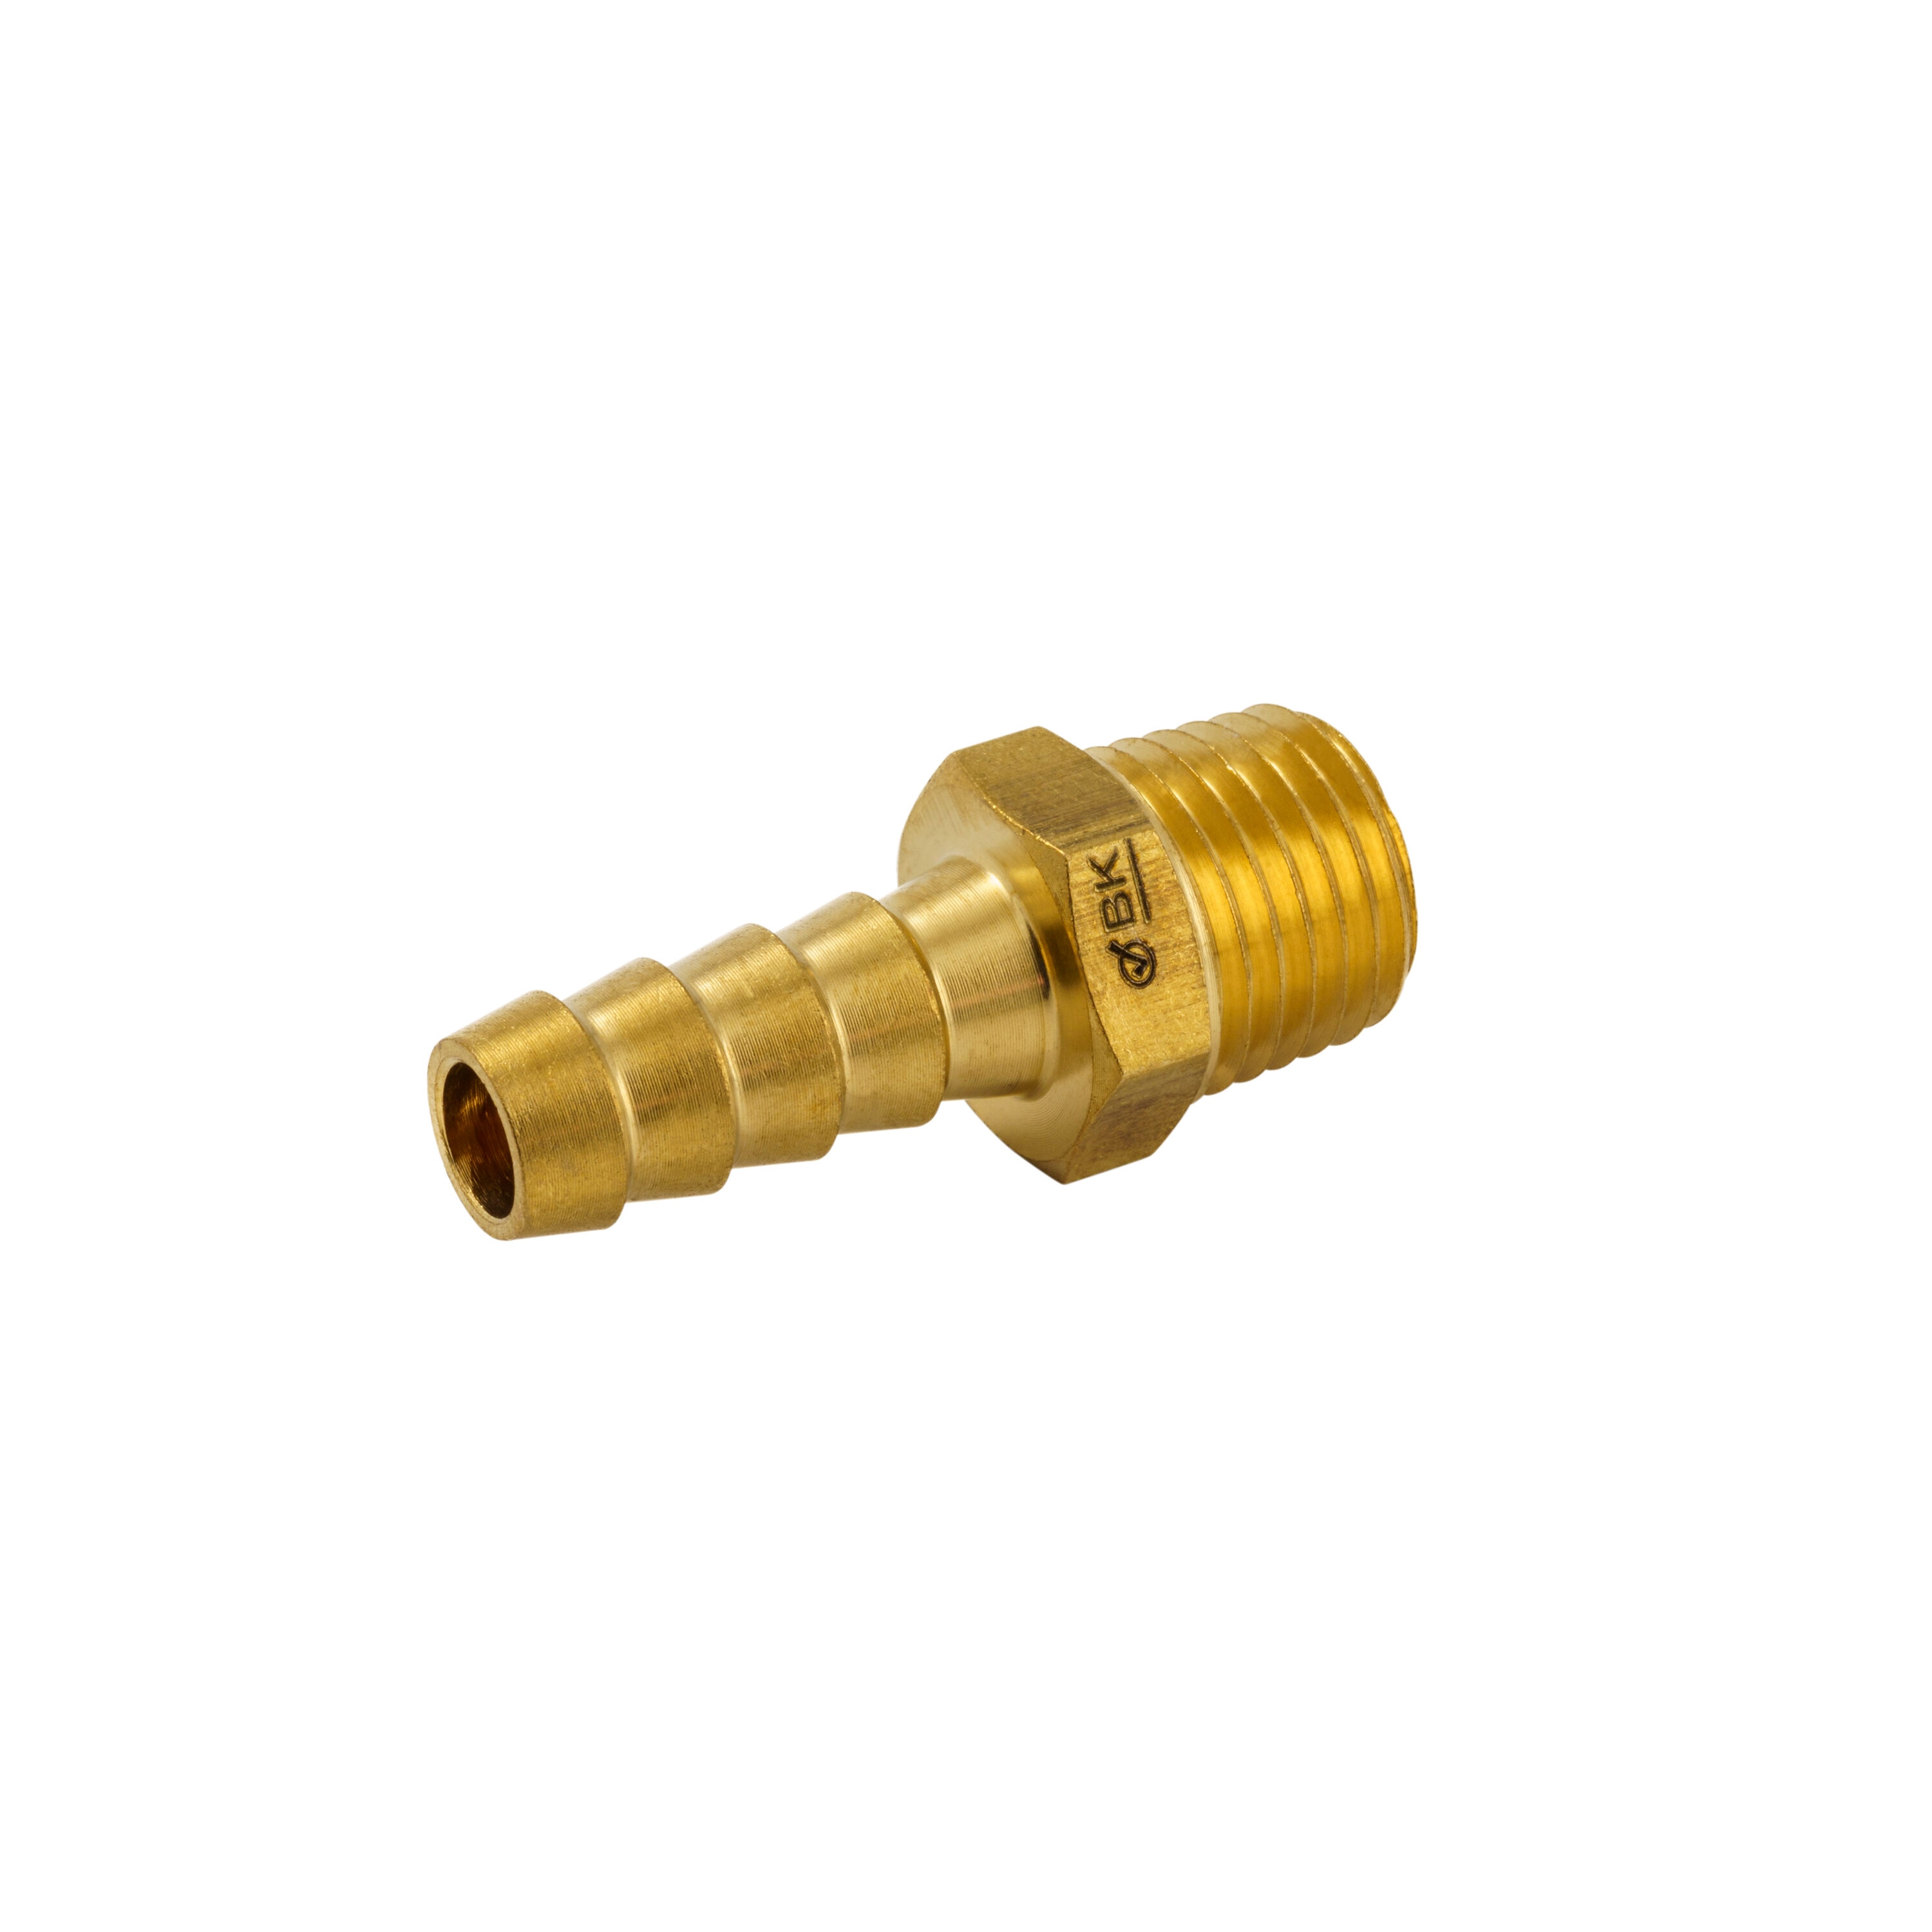 Proline Series 5/8-in x 5/8-in Compression Coupling Union Fitting